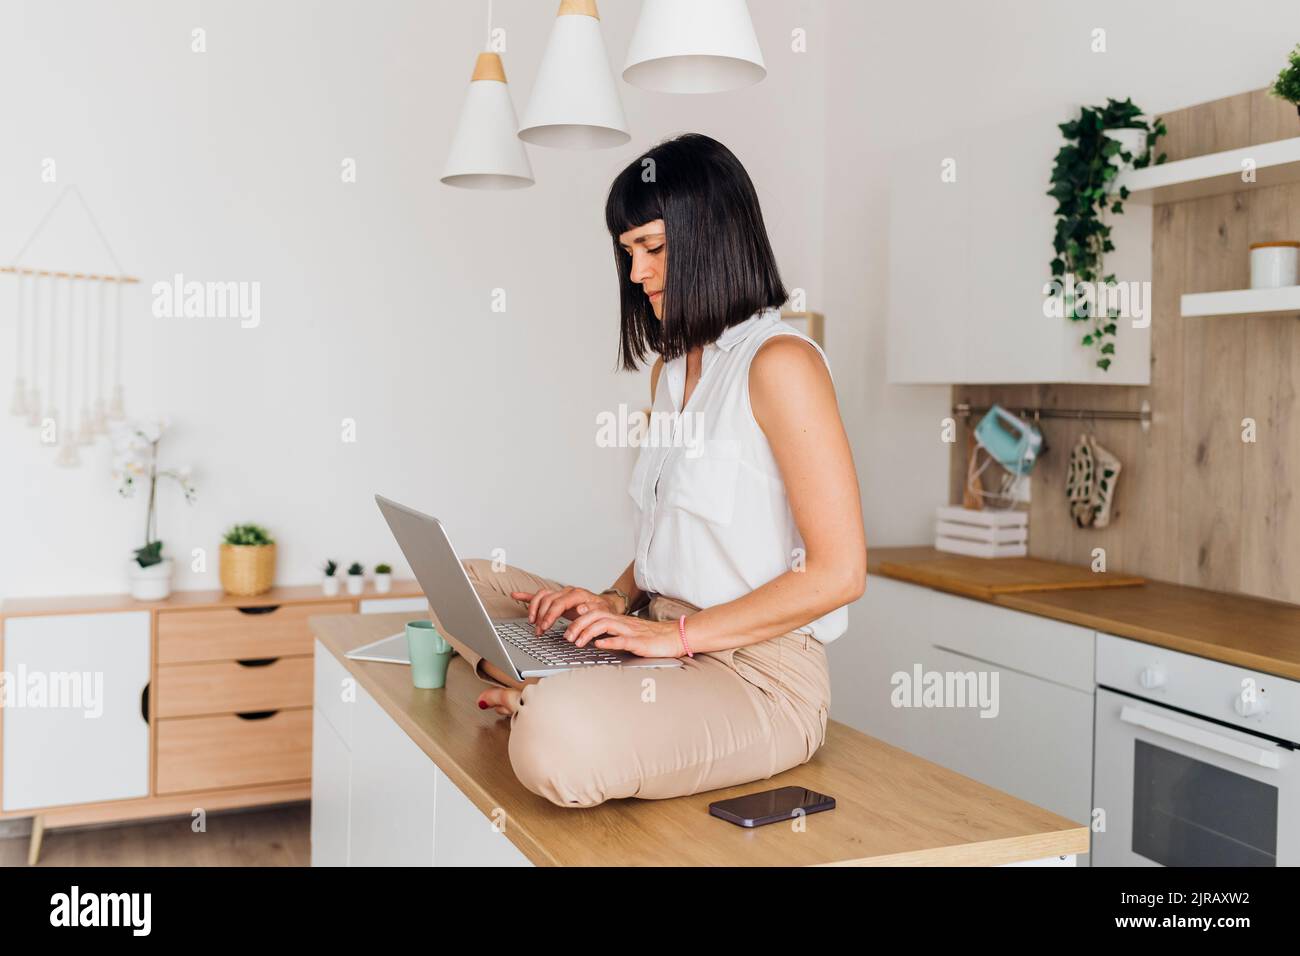 Freelancer sitting on kitchen island with laptop at home Stock Photo